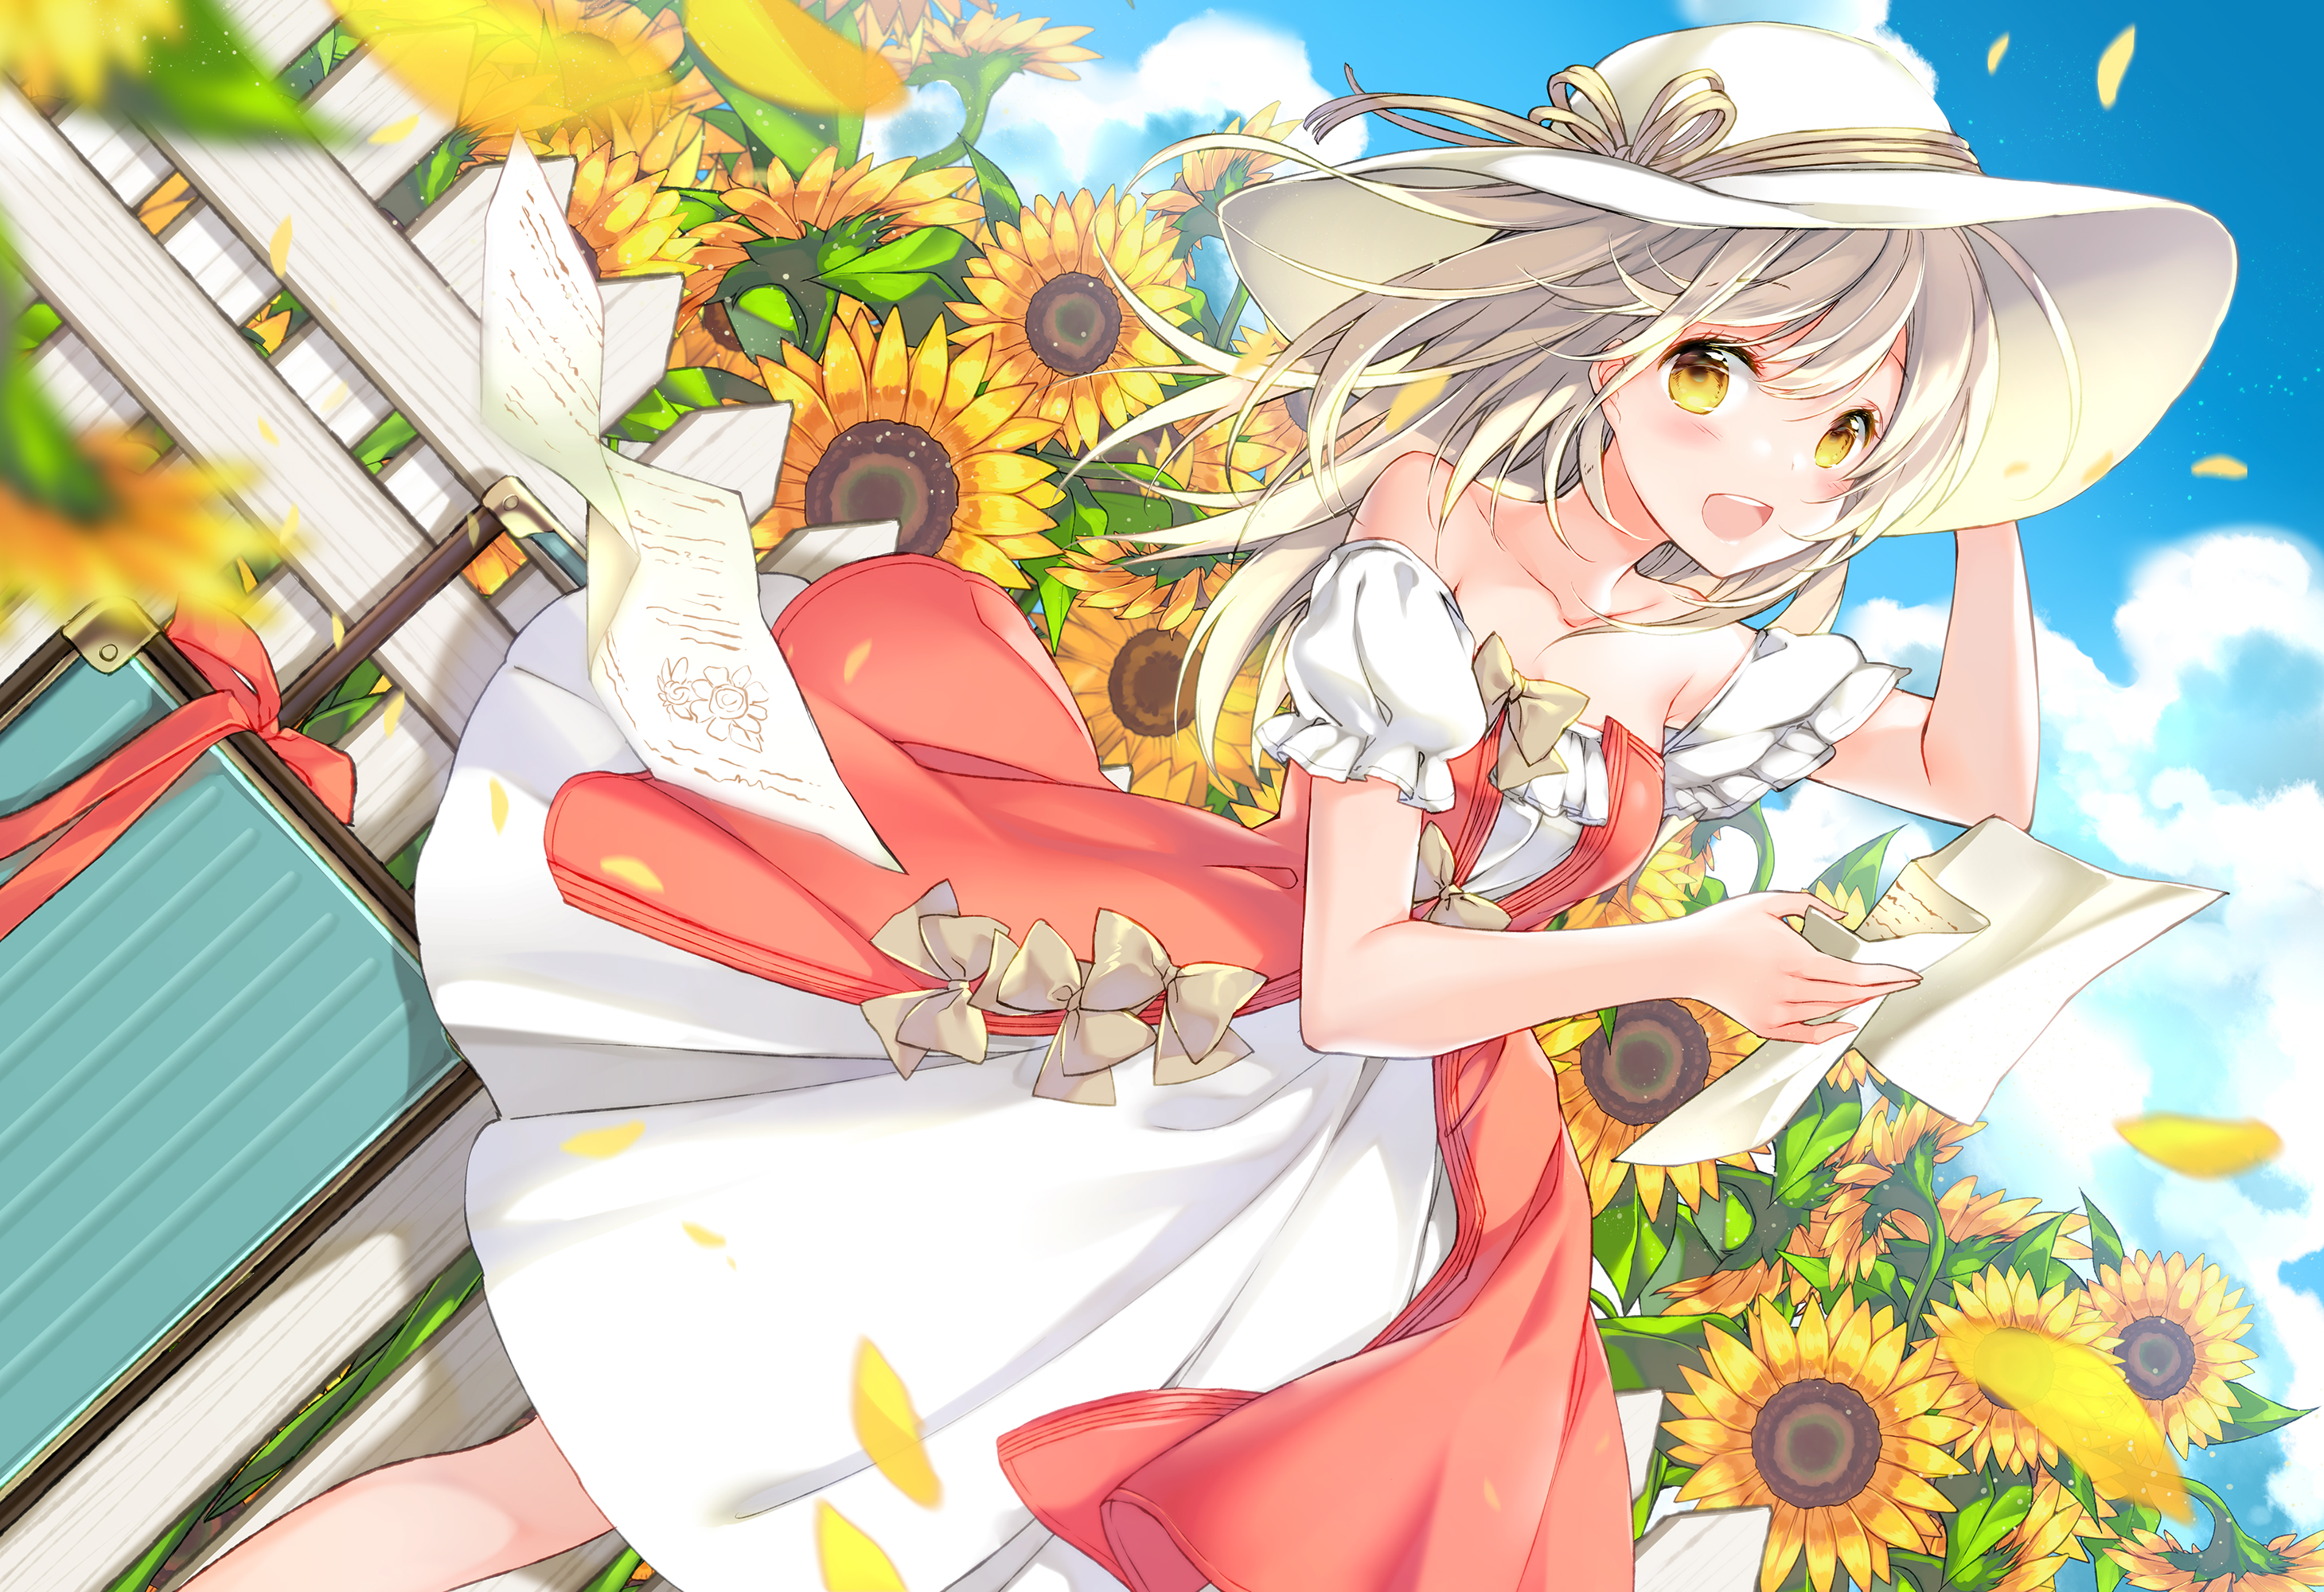 Anime Anime Girls Hat Blushing Flowers Petals Sky Clouds Standing Looking At Viewer Dress Blonde Yel 2920x2000